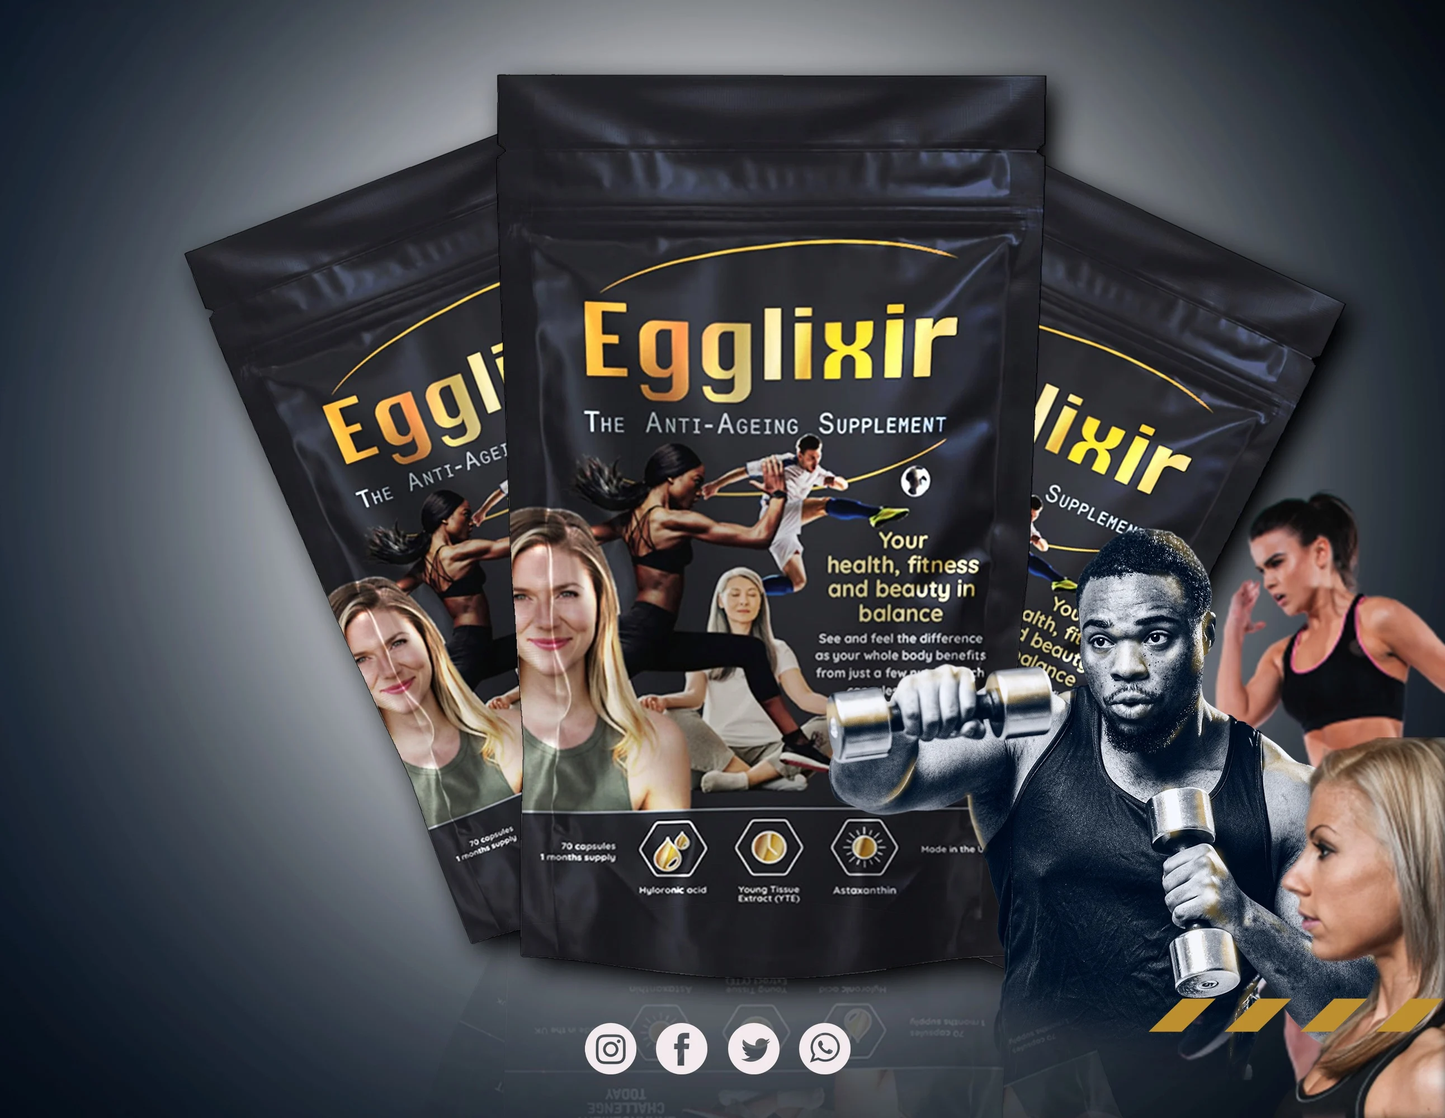 3 x egglixir 1 month supply for £99